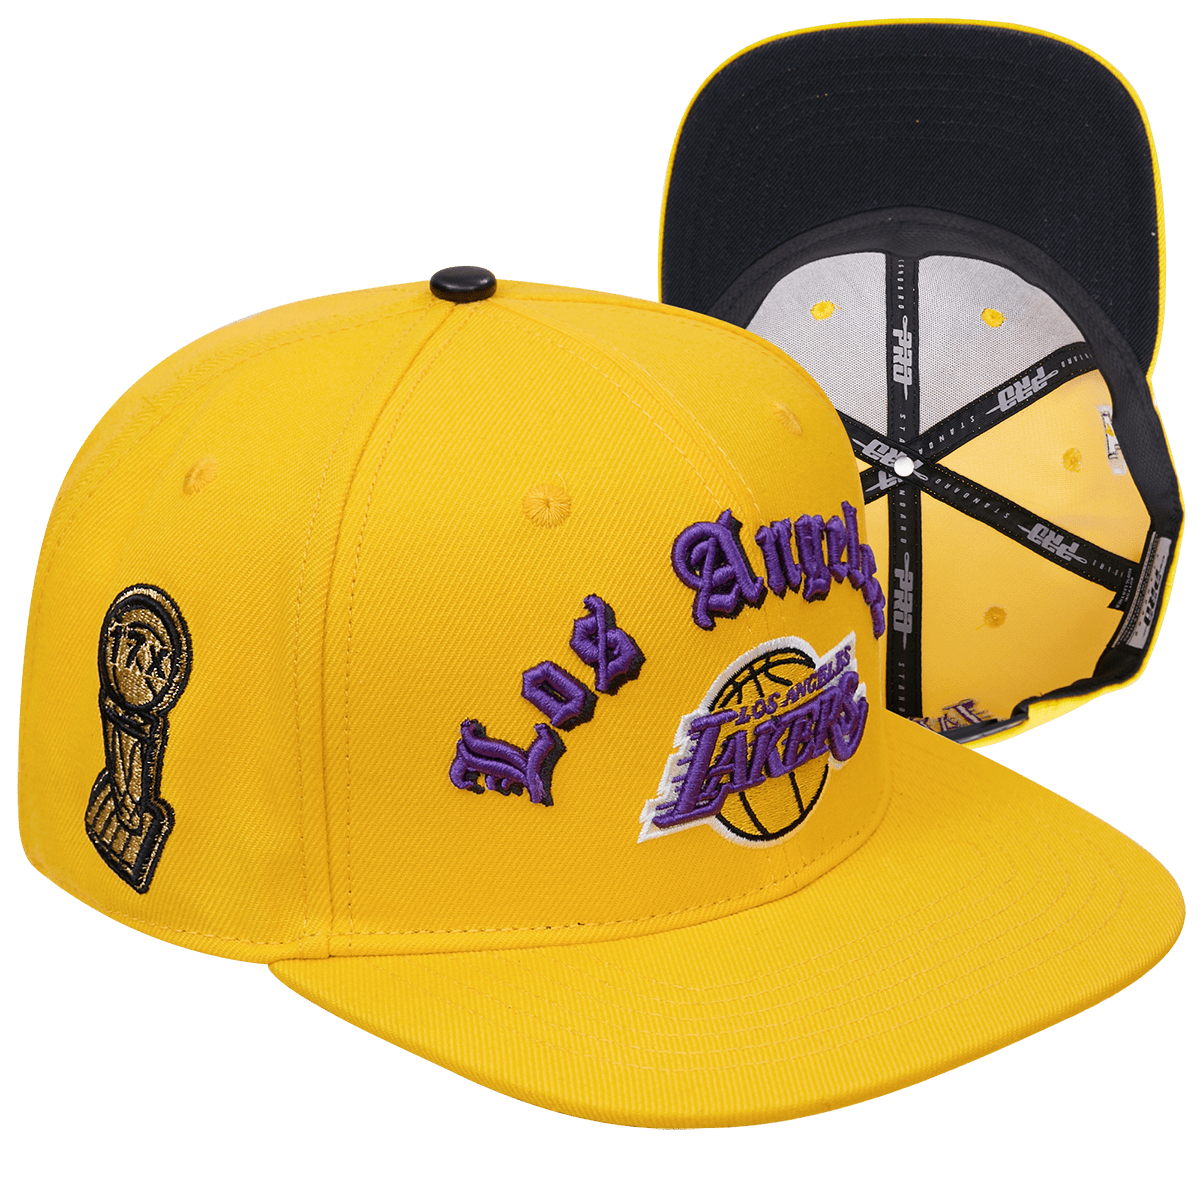 lakers hat png